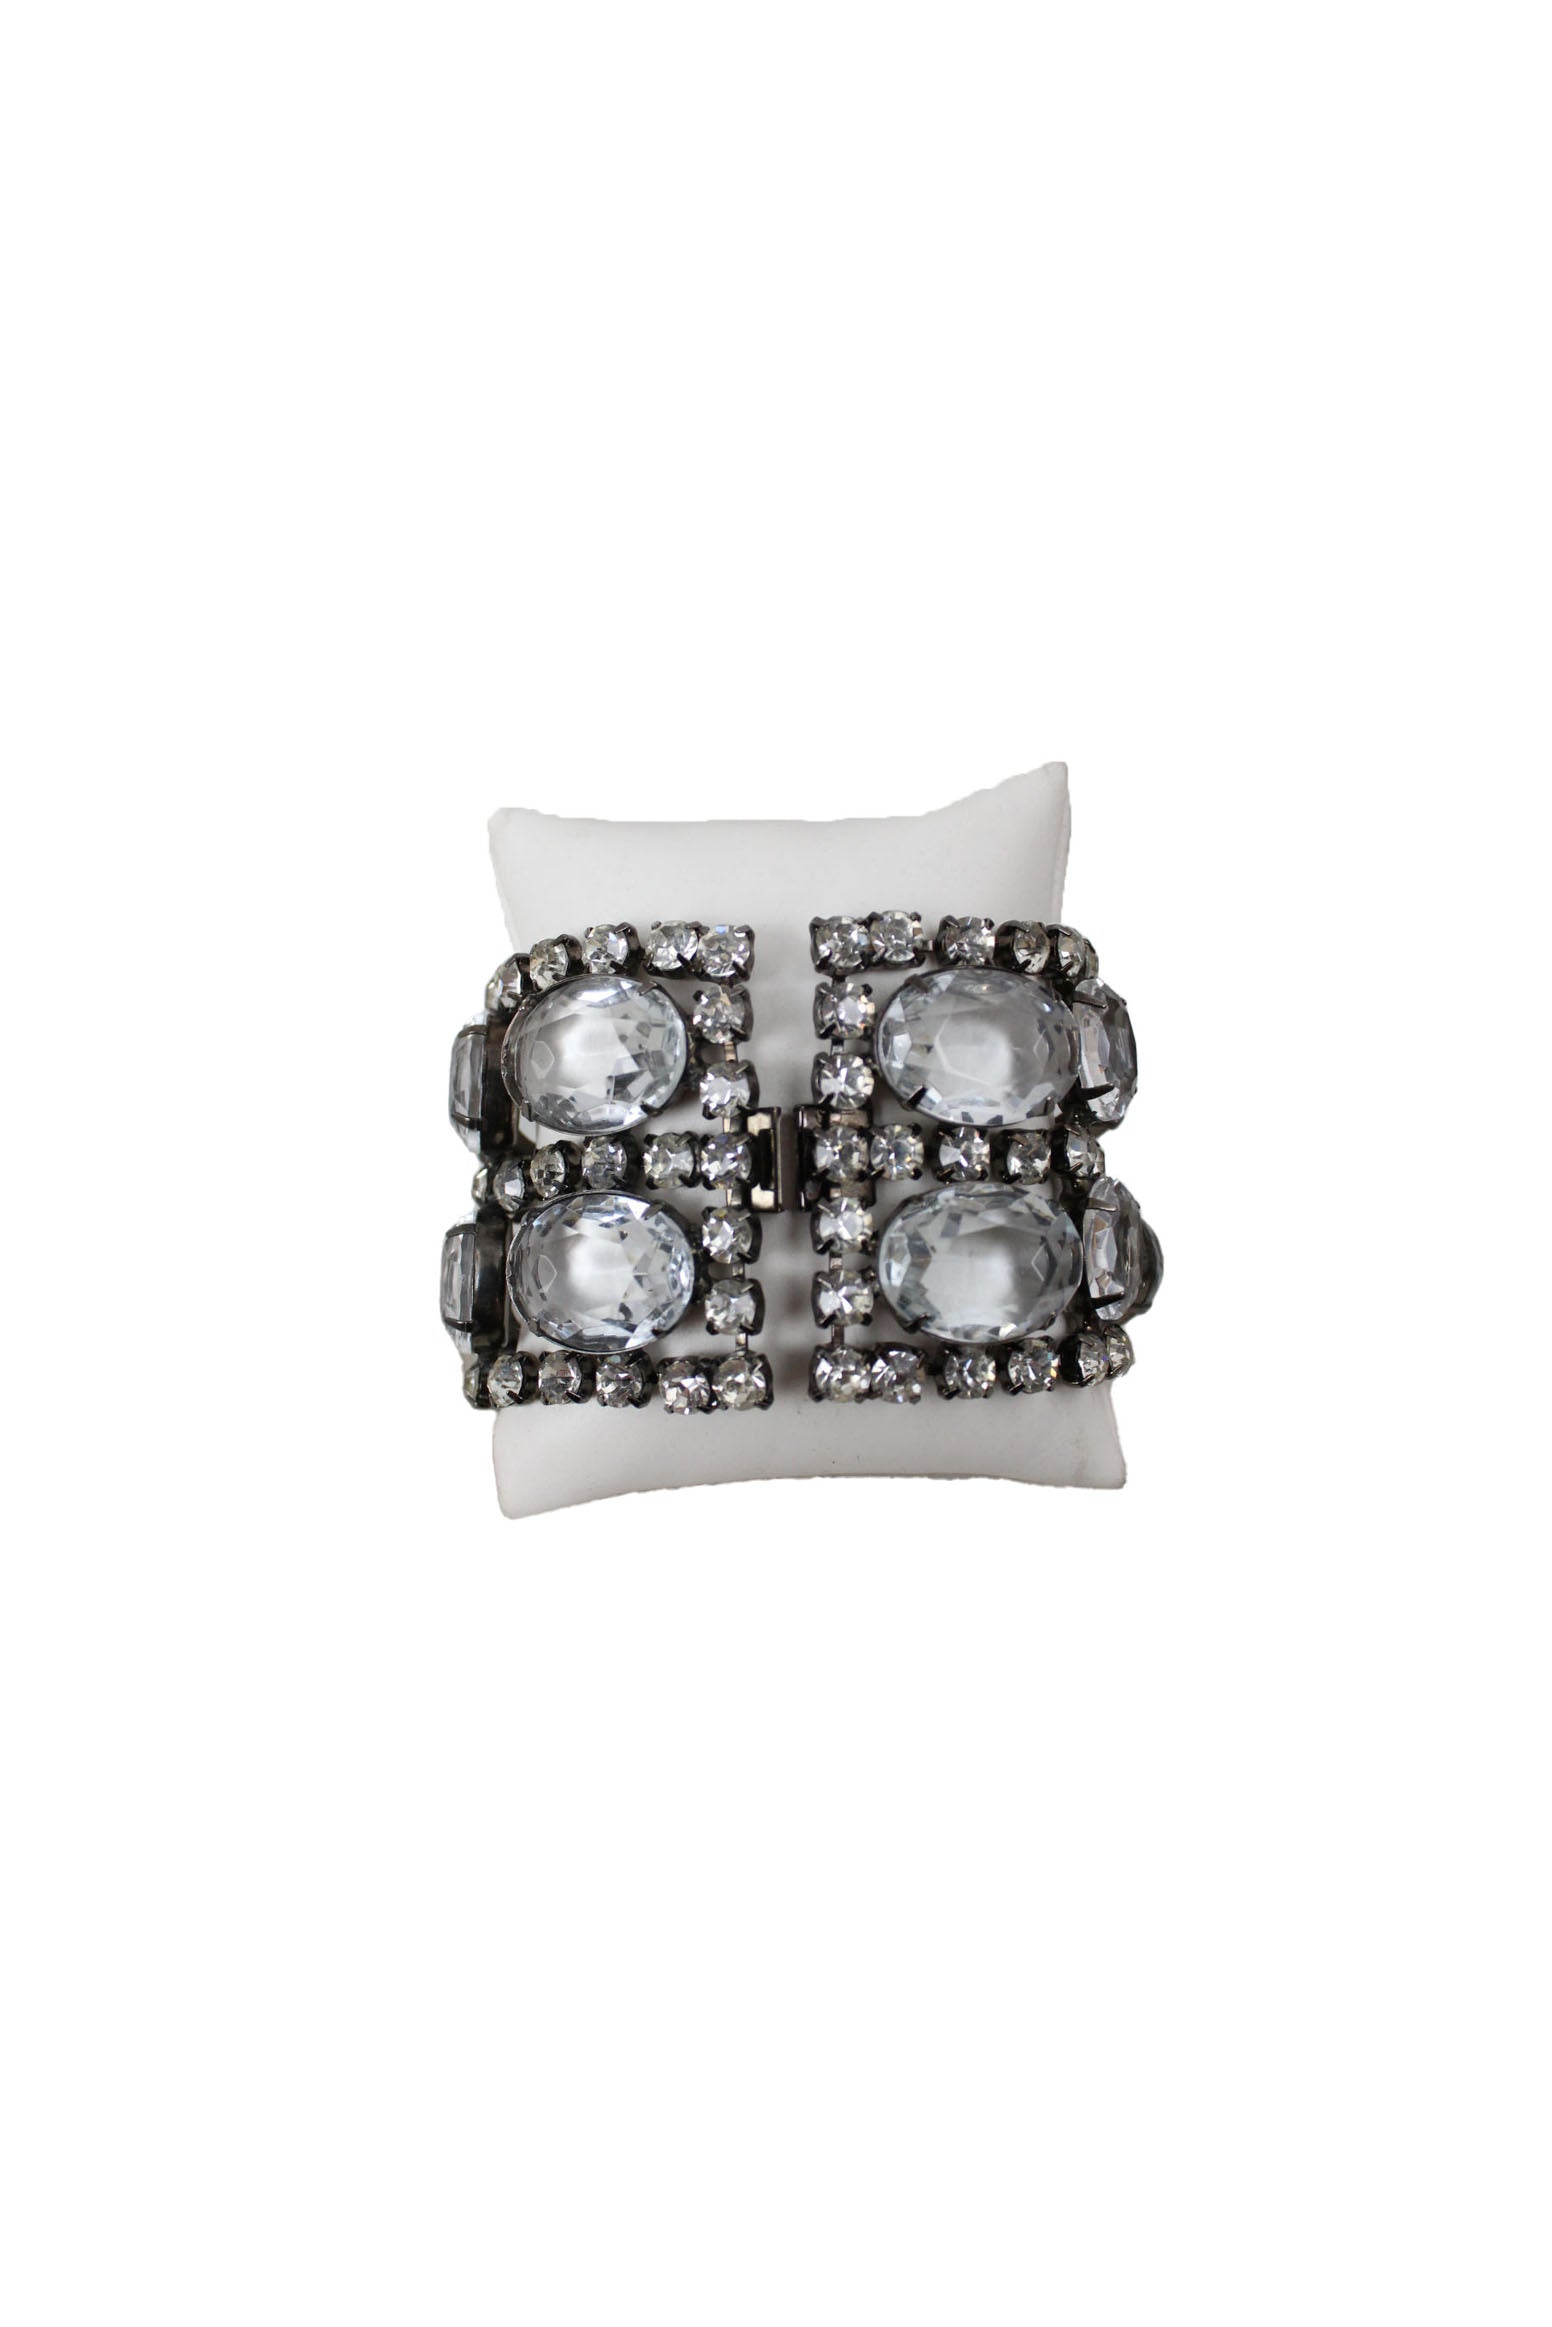 front of graziano silver tone bracelet. features rhinestones throughout, oval faux crystals detail, rectangular shape, and lock up closure. 